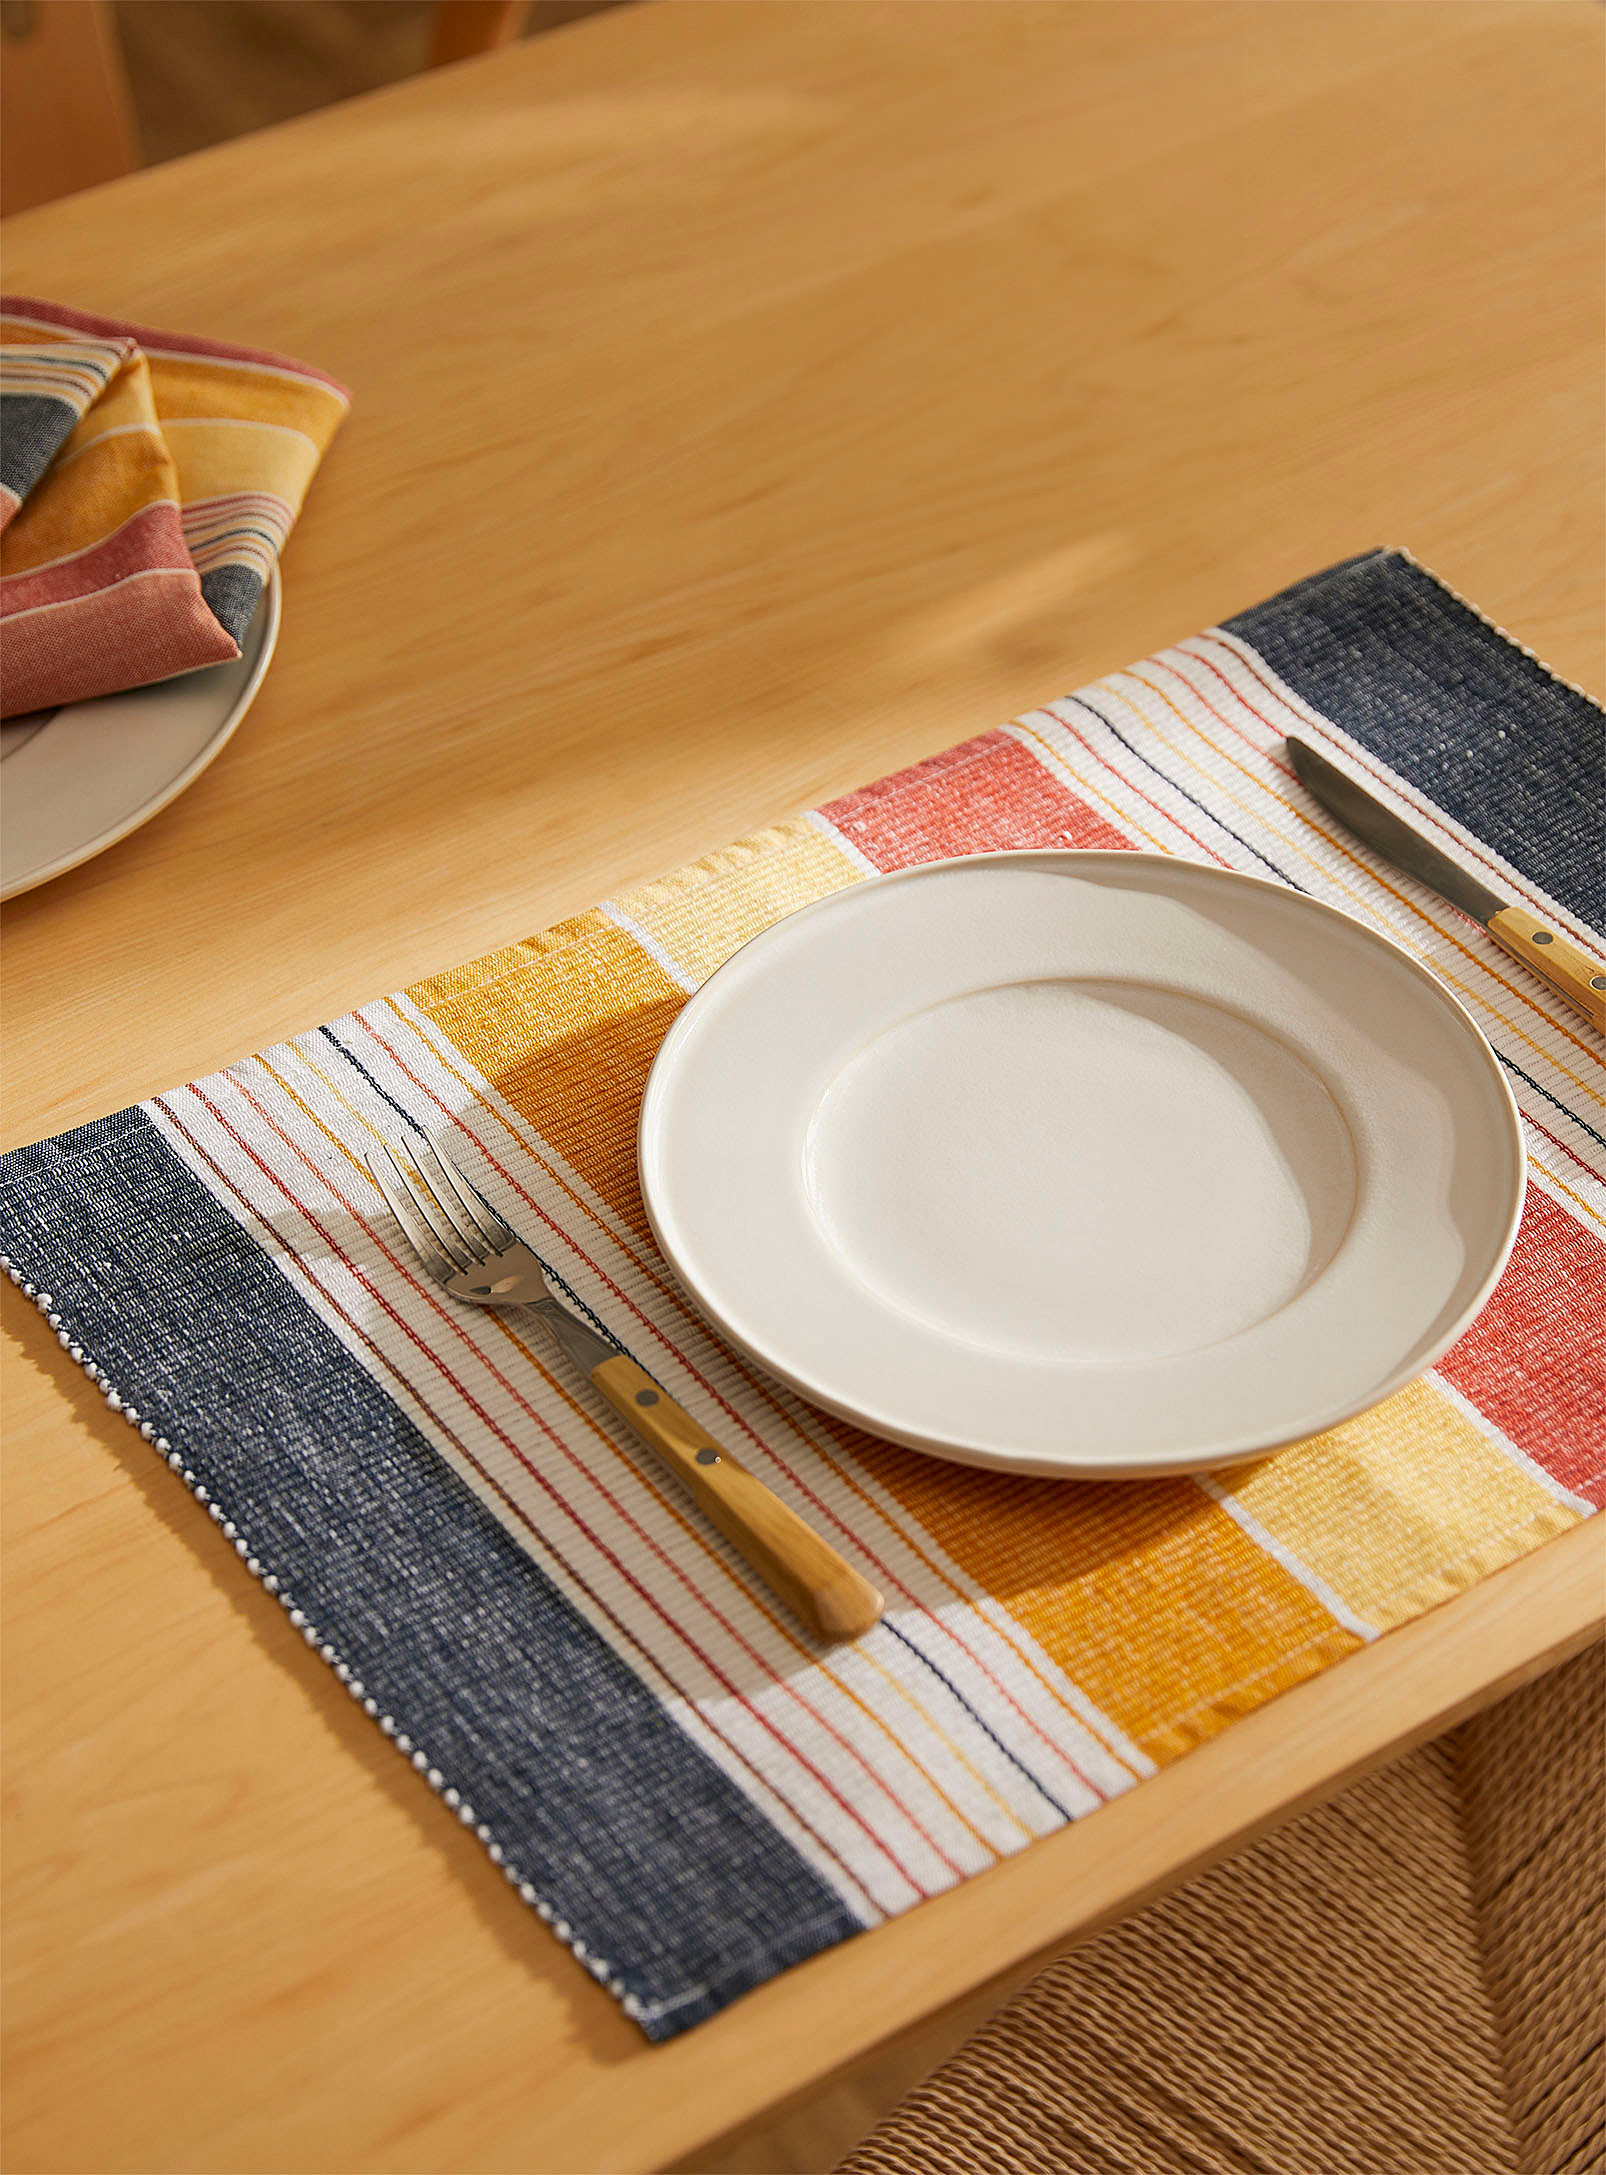 Simons Maison - Twilight Glow recycled cotton placemat